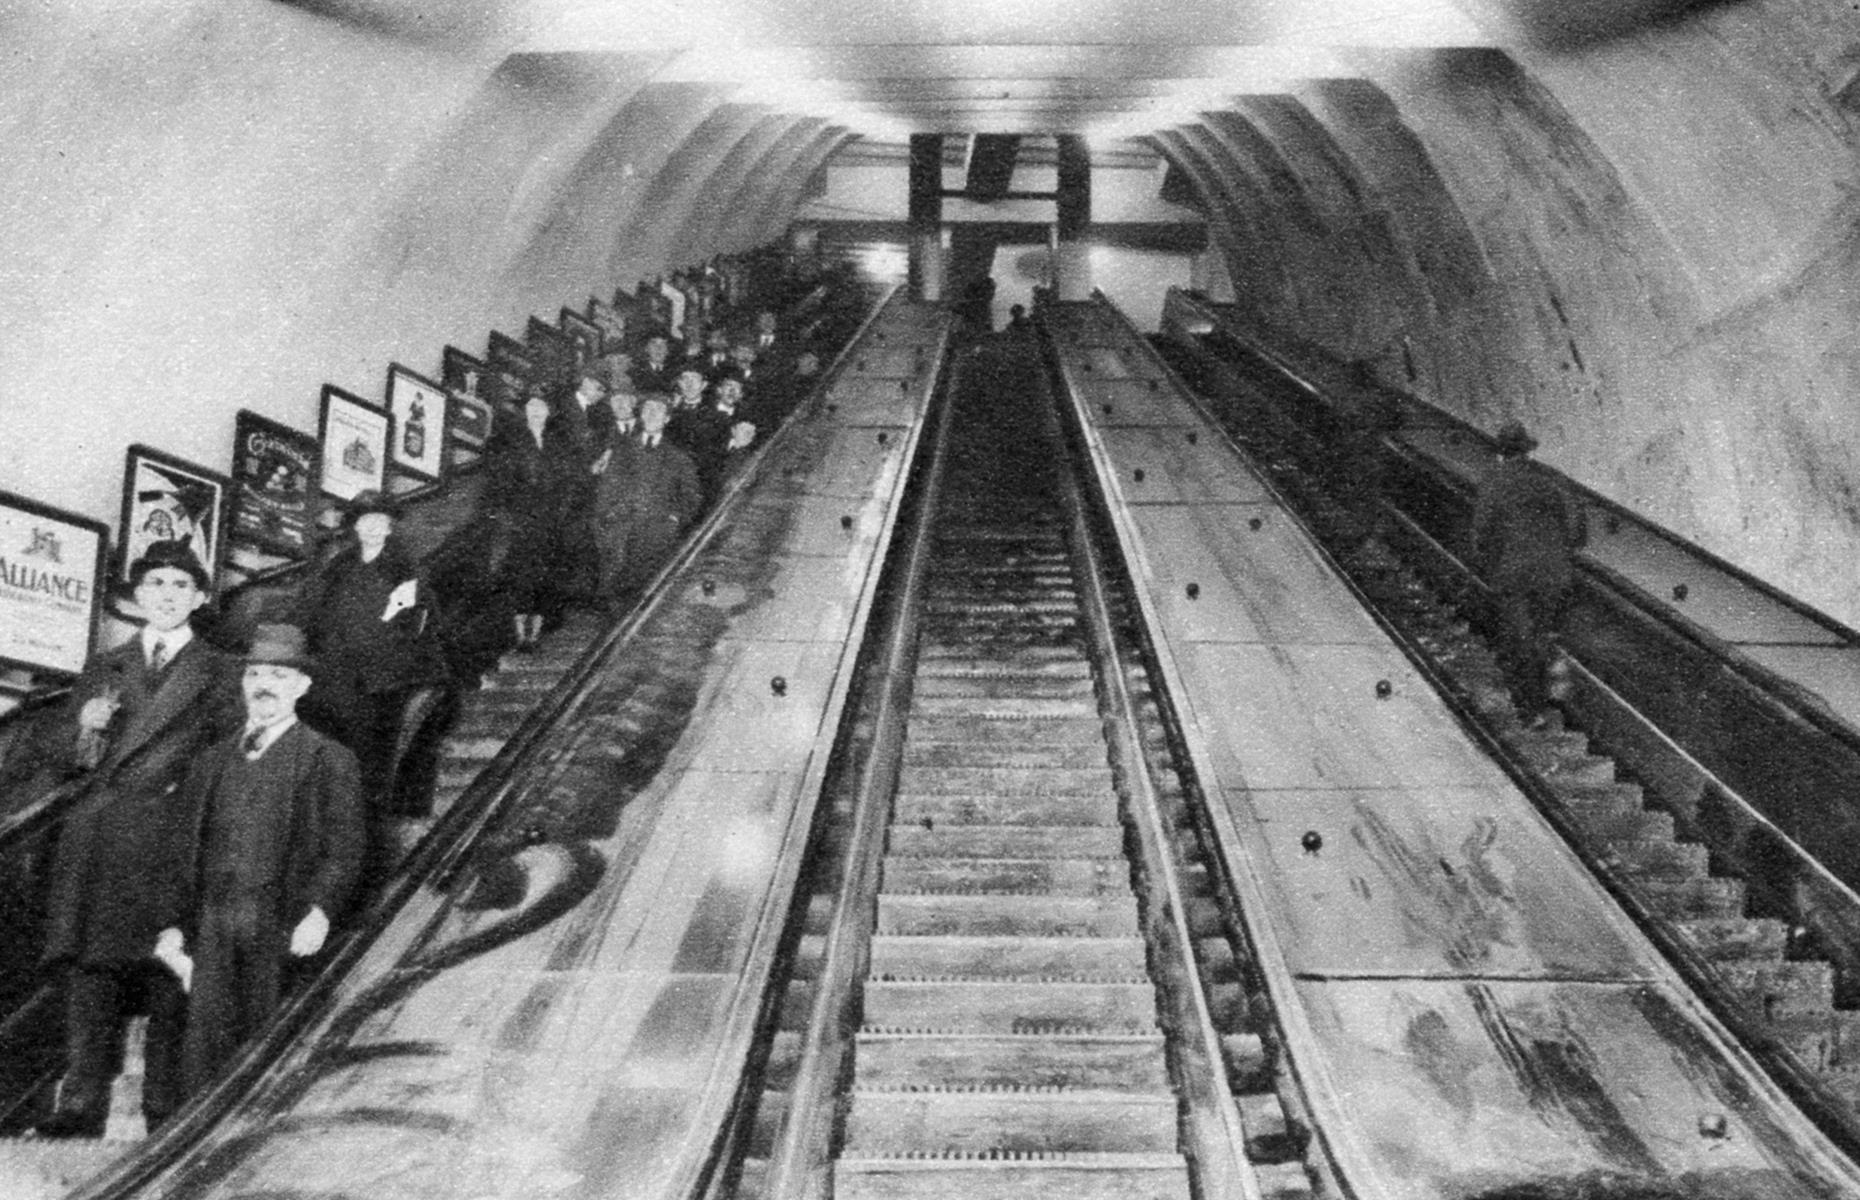 <p>Escalators were a novelty in the early 20th century. The first escalator was introduced to the London Underground at Earl's Court station in 1911. Commuters are pictured here in the mid-1920s riding down an escalator at London's Tottenham Court Road station. You can spot charming vintage ads lining the wall next to them.</p>  <p><strong><a href="https://www.loveexploring.com/galleries/104011/incredible-images-of-cruising-through-the-ages">Take a look at these amazing photos of cruising through the ages</a></strong></p>